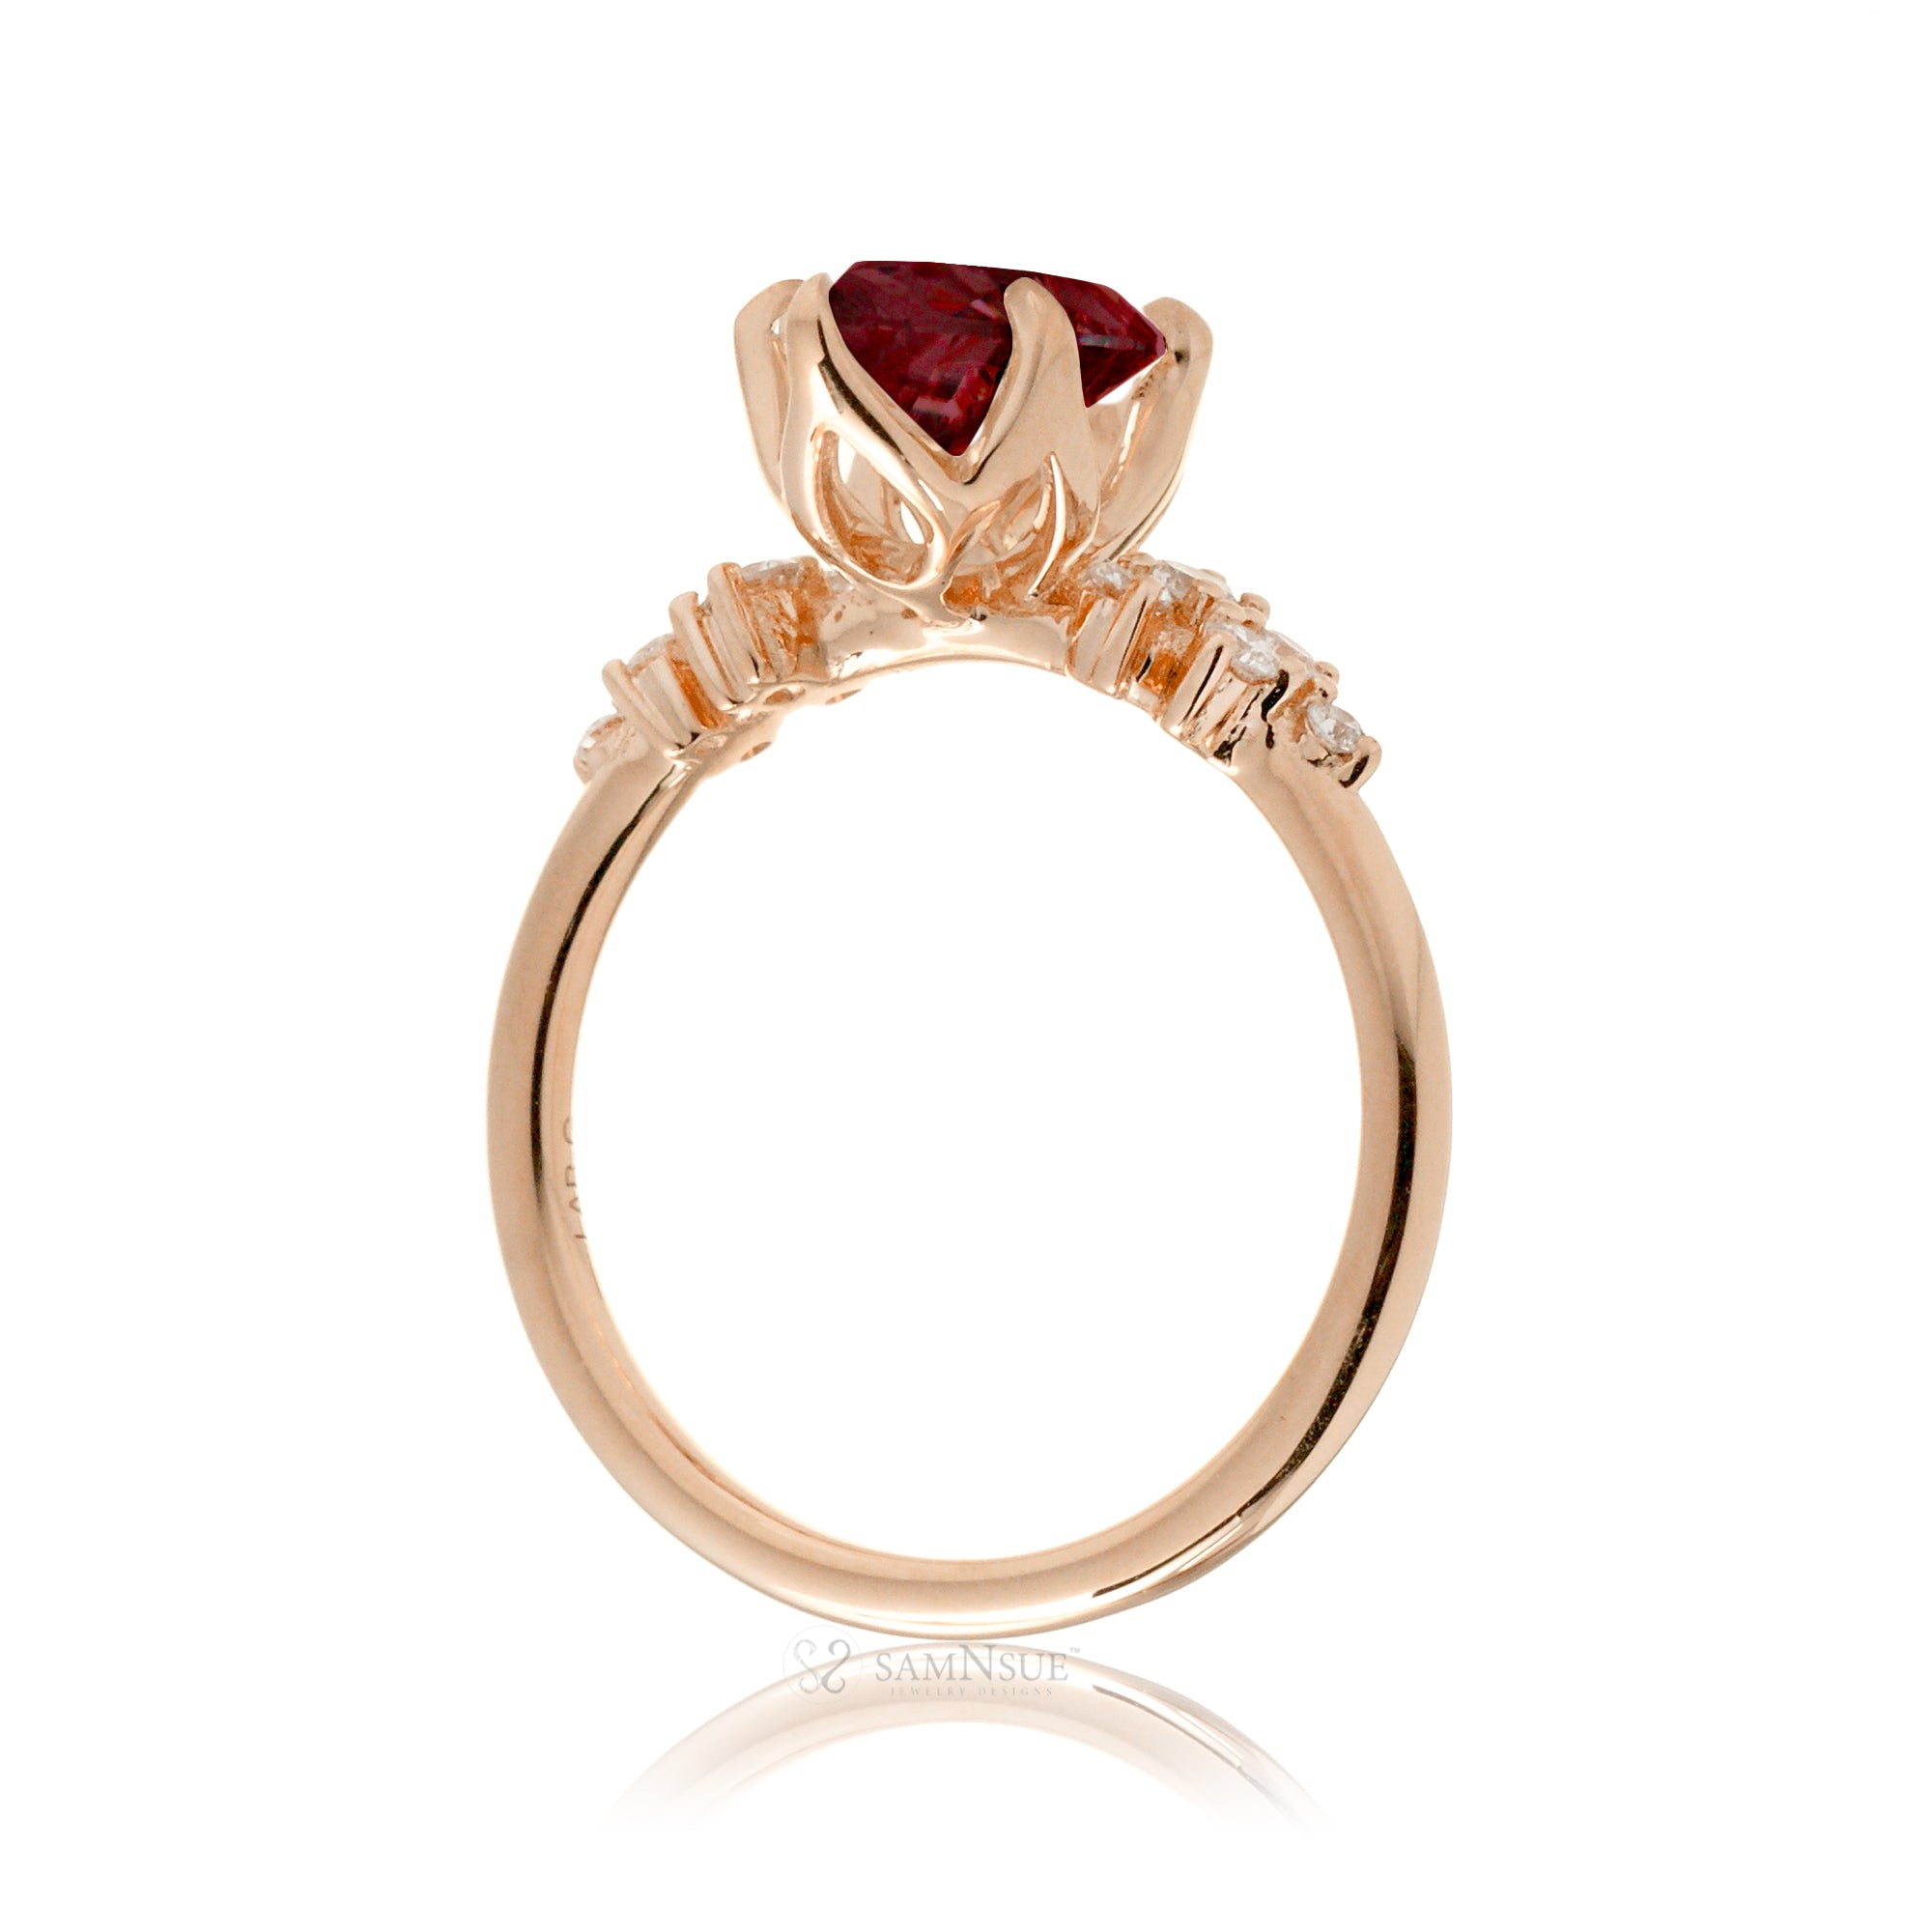 Marquise ruby and diamond solitaire engagement ring in rose gold